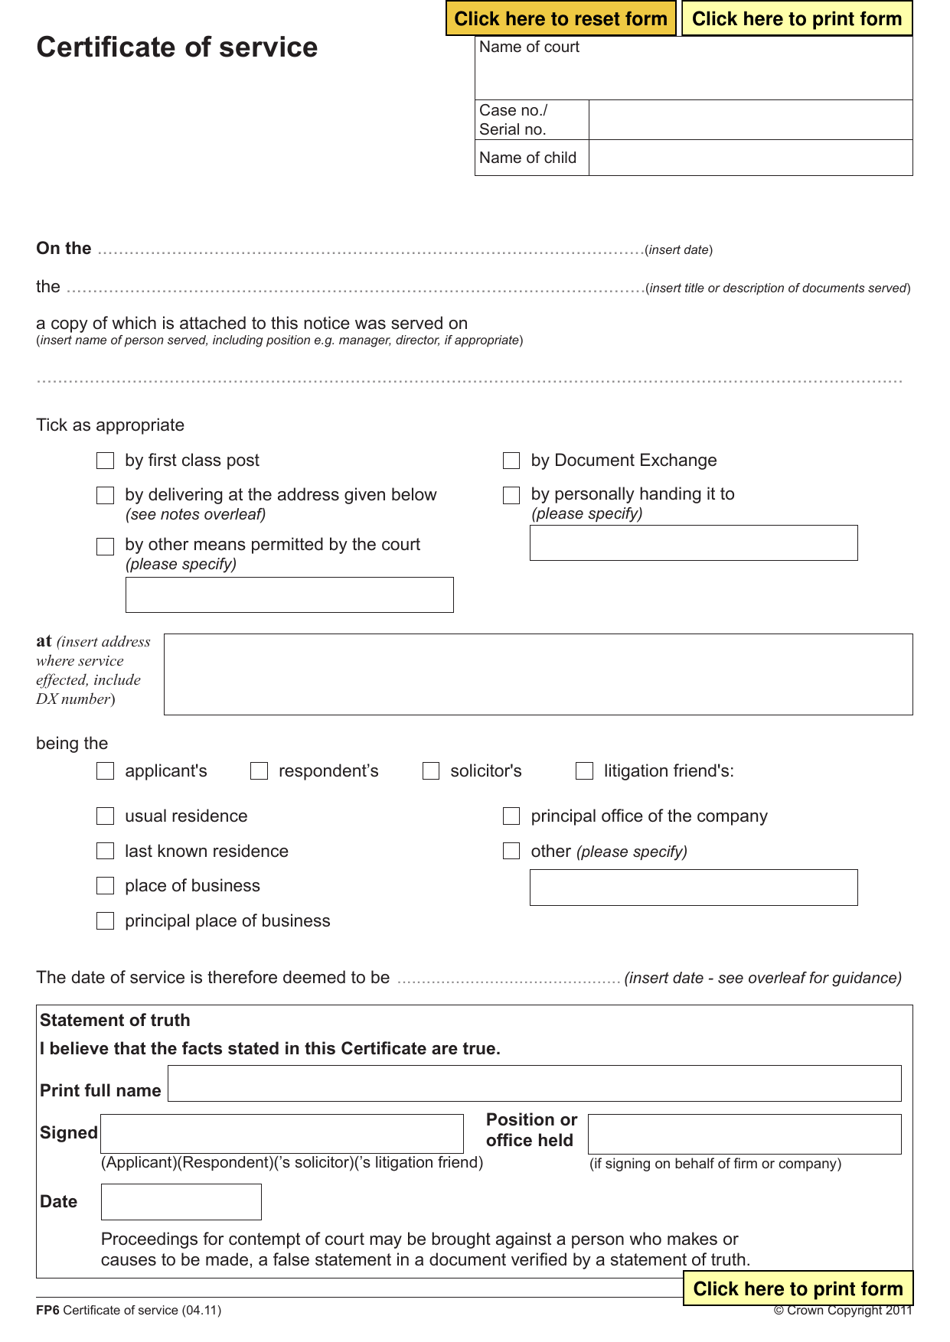 Form FP6 Certificate of Service - United Kingdom, Page 1